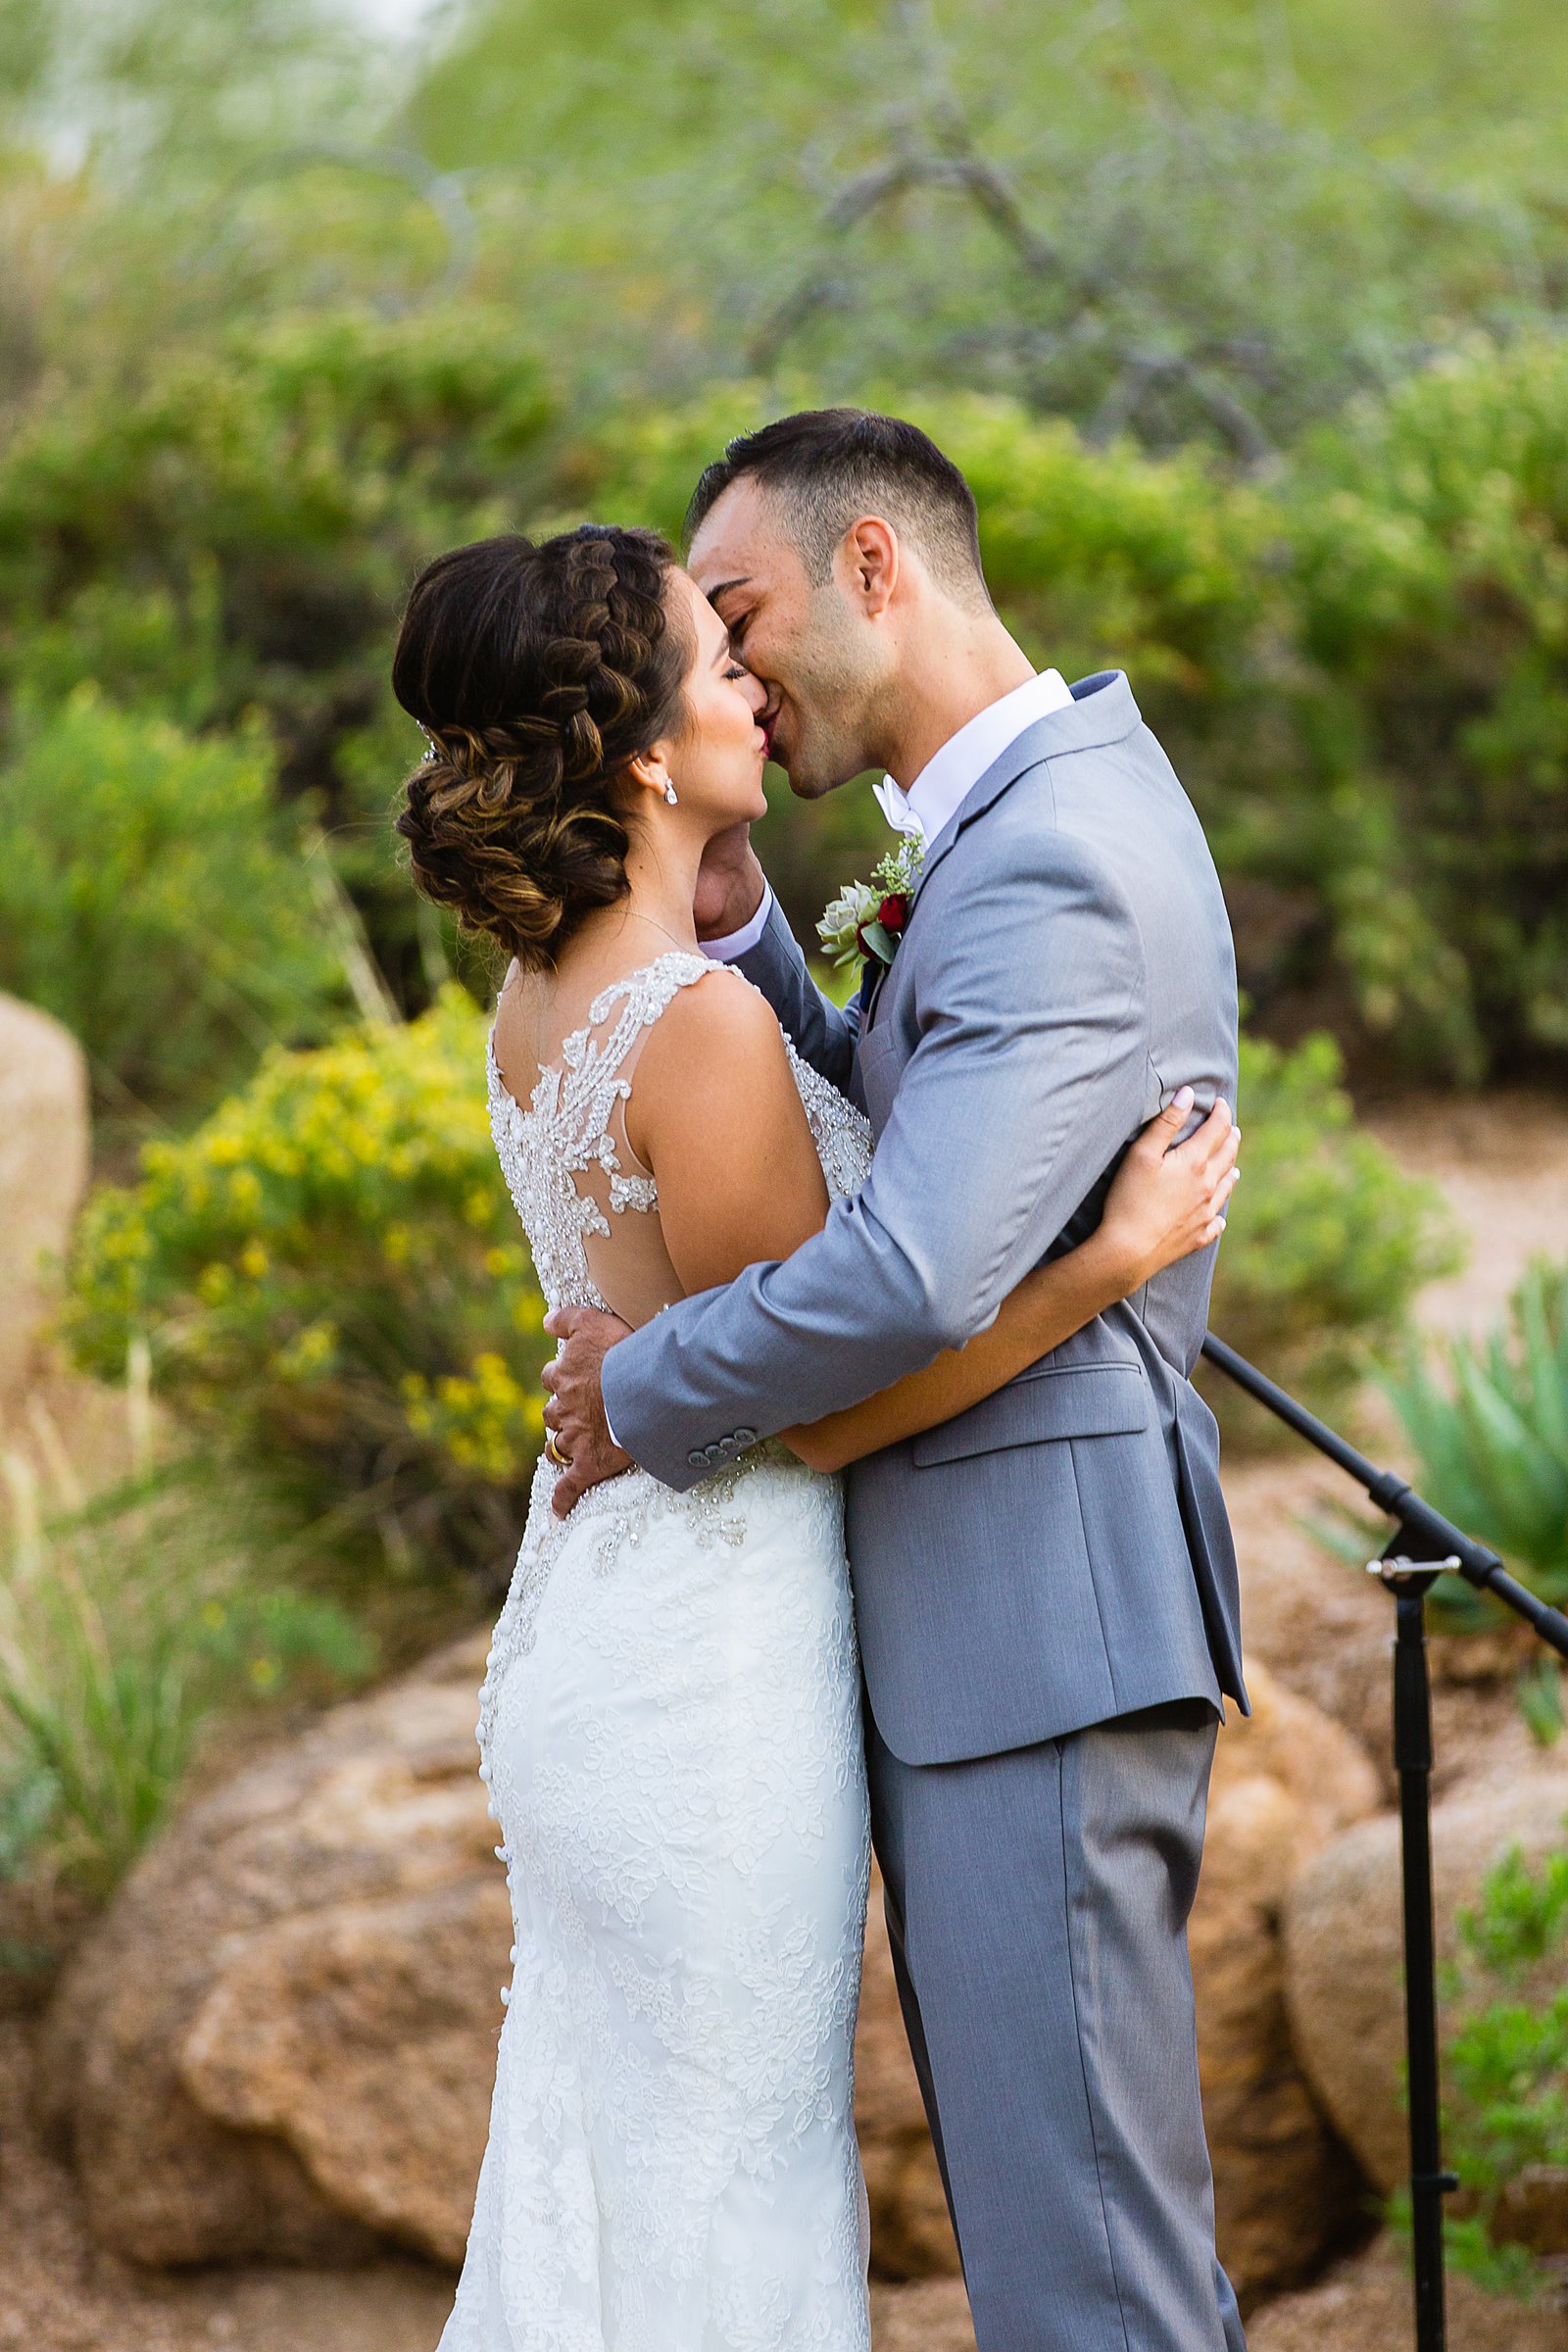 Bride and groom share their first kiss during their wedding ceremony at Troon North by Arizona wedding photographer PMA Photography.